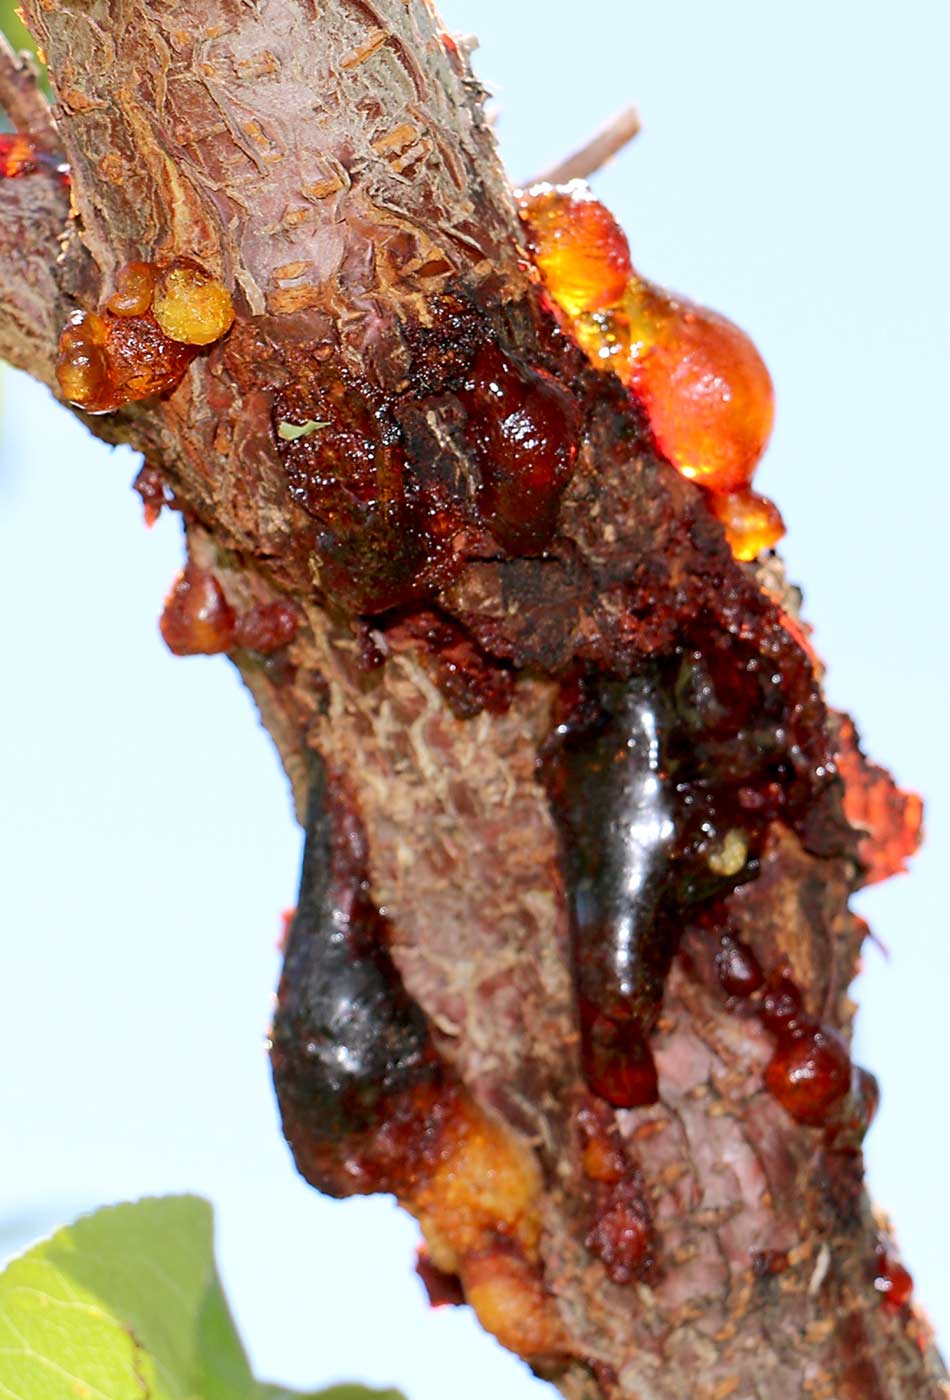 An oozing cytospora canker shows why the pathogen is commonly called gummosis. Colorado growers and researchers are teaming up to find solutions to control this pathogen that’s costing millions in lost productivity.<b>(Courtesy Ioannis Minas)</b>